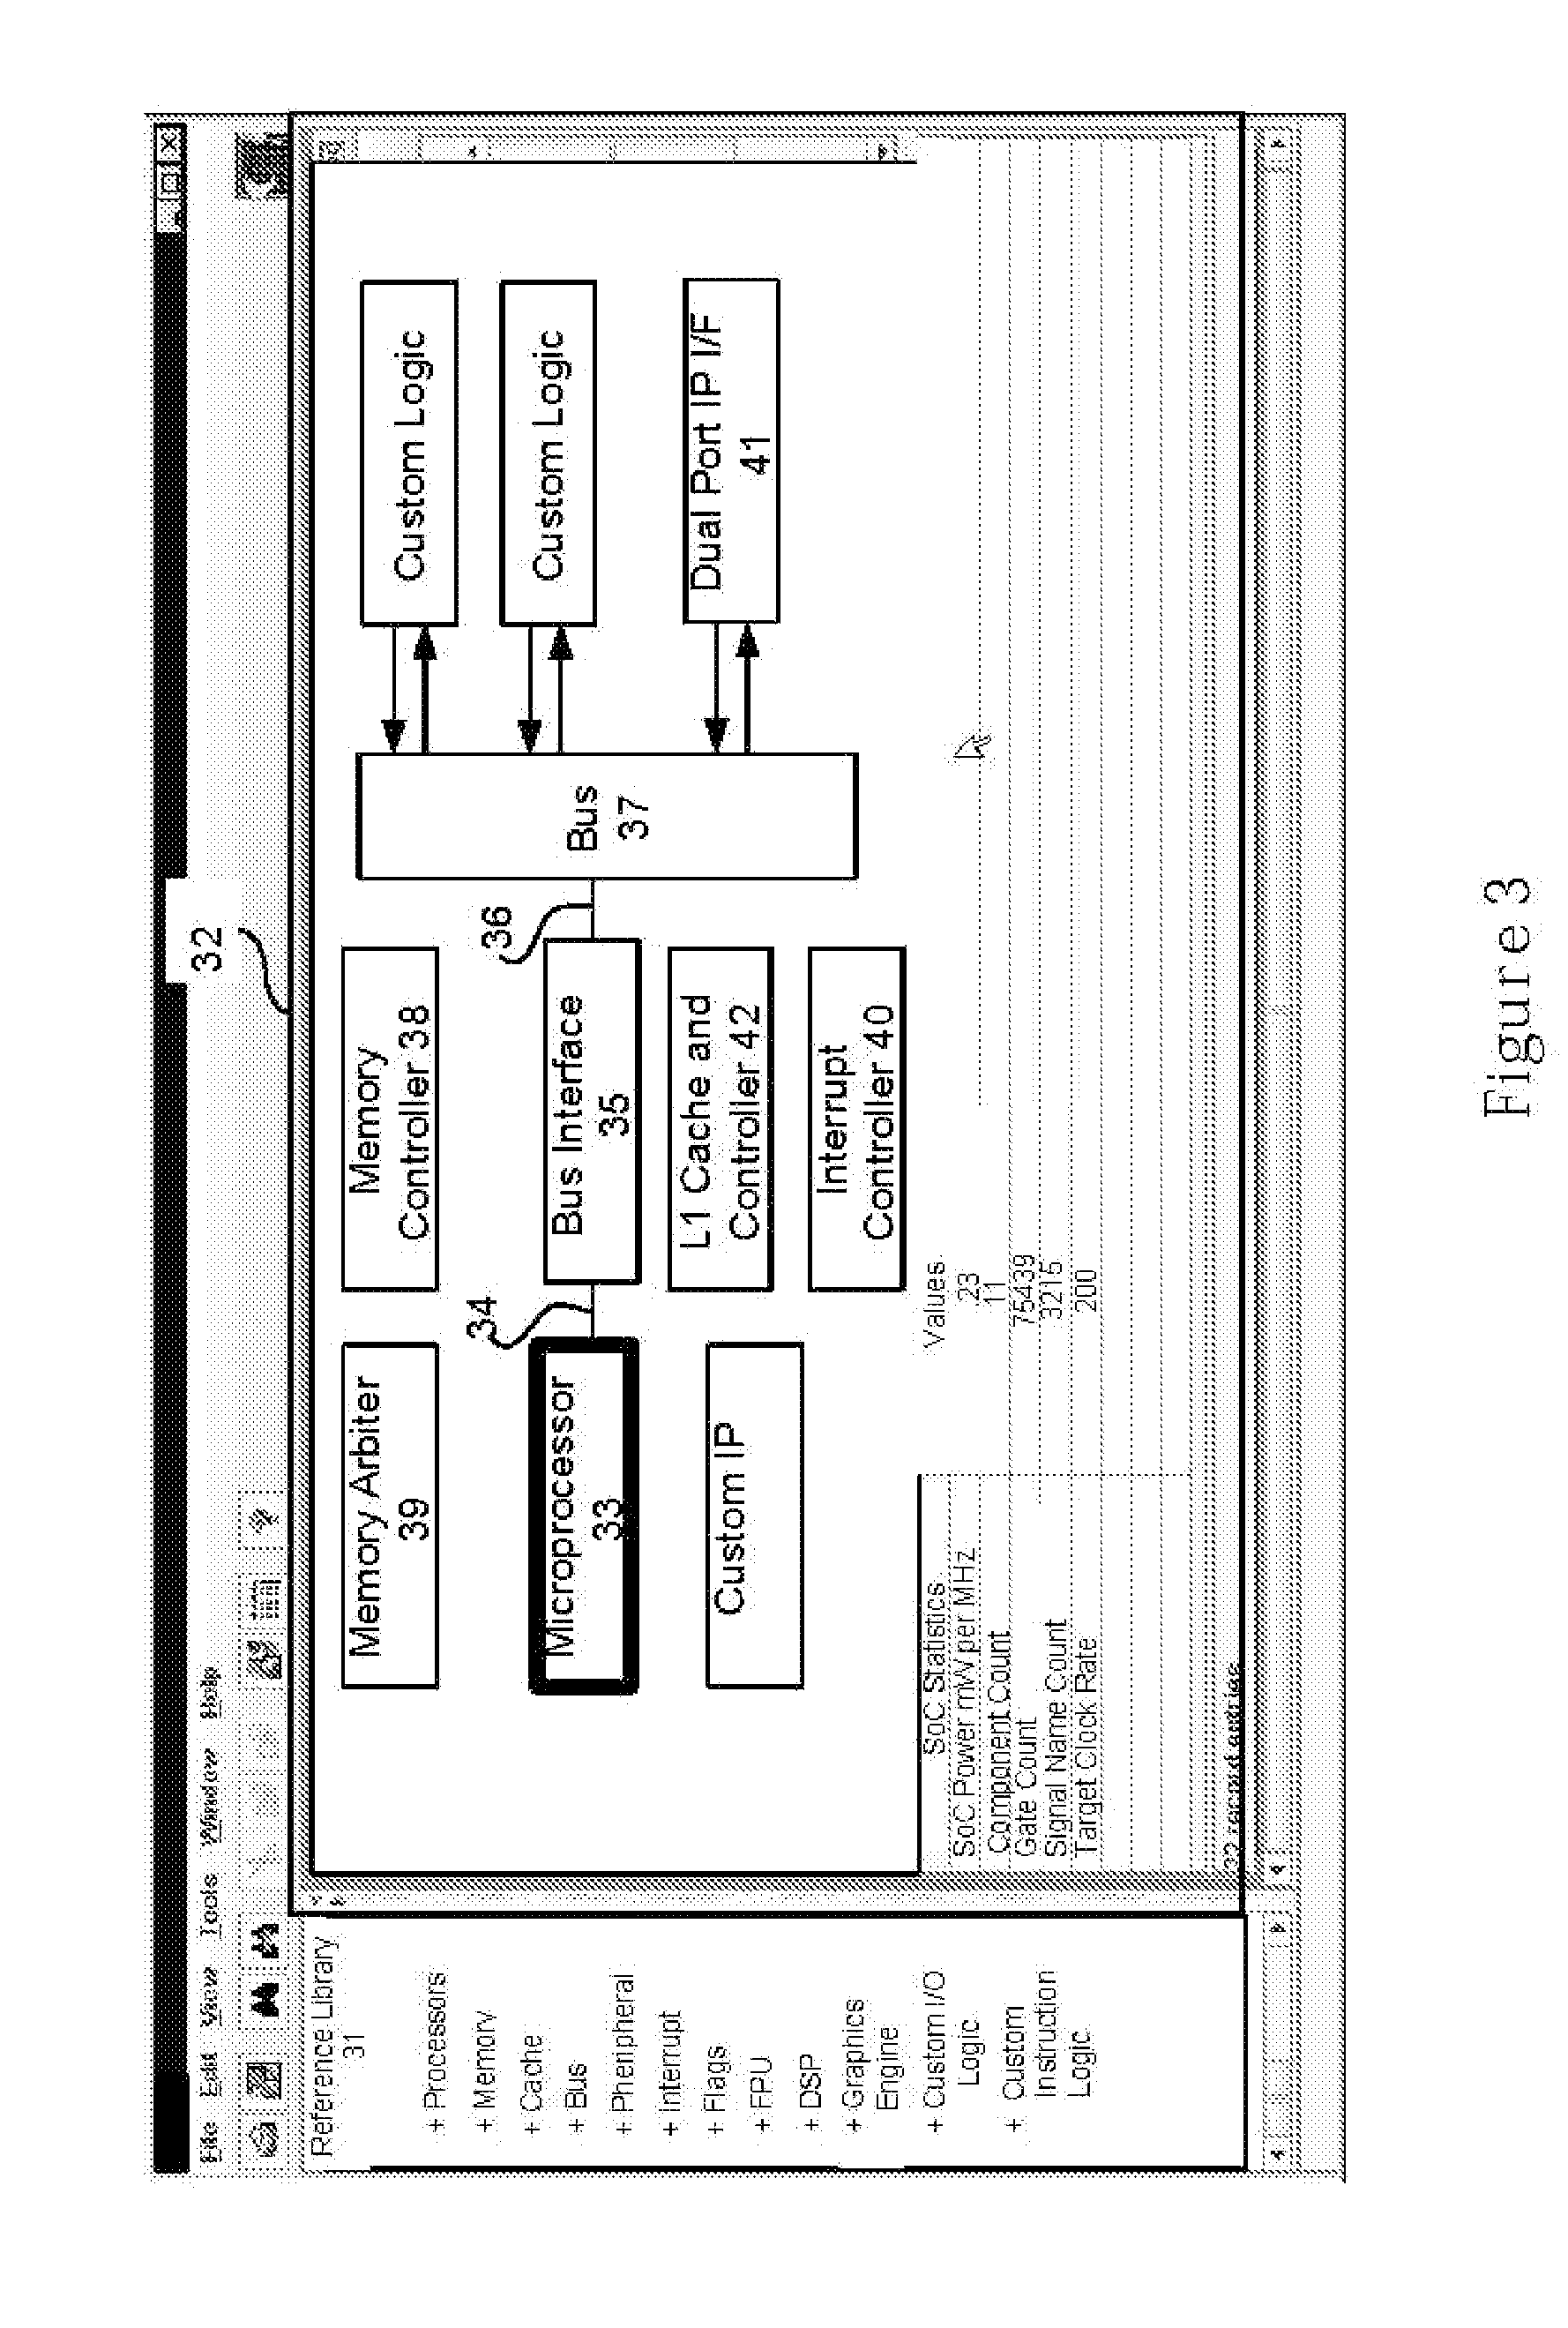 Protecting Trade Secrets During the Design and Configuration of an Integrated Circuit Semiconductor Design